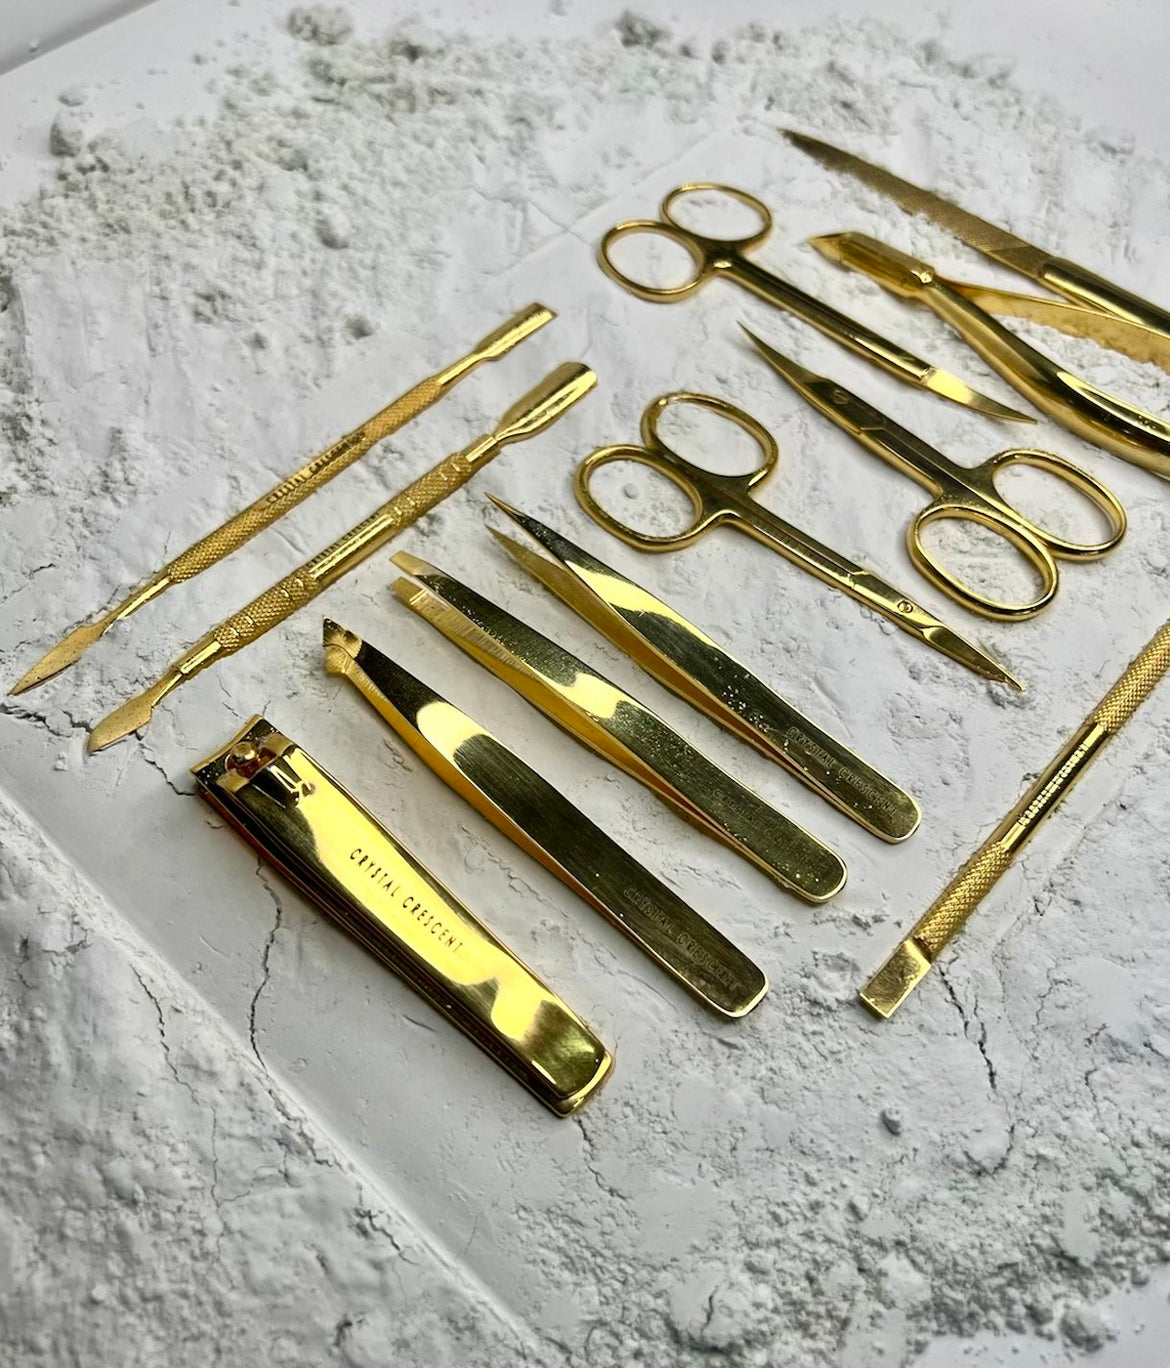 The Gold Tools